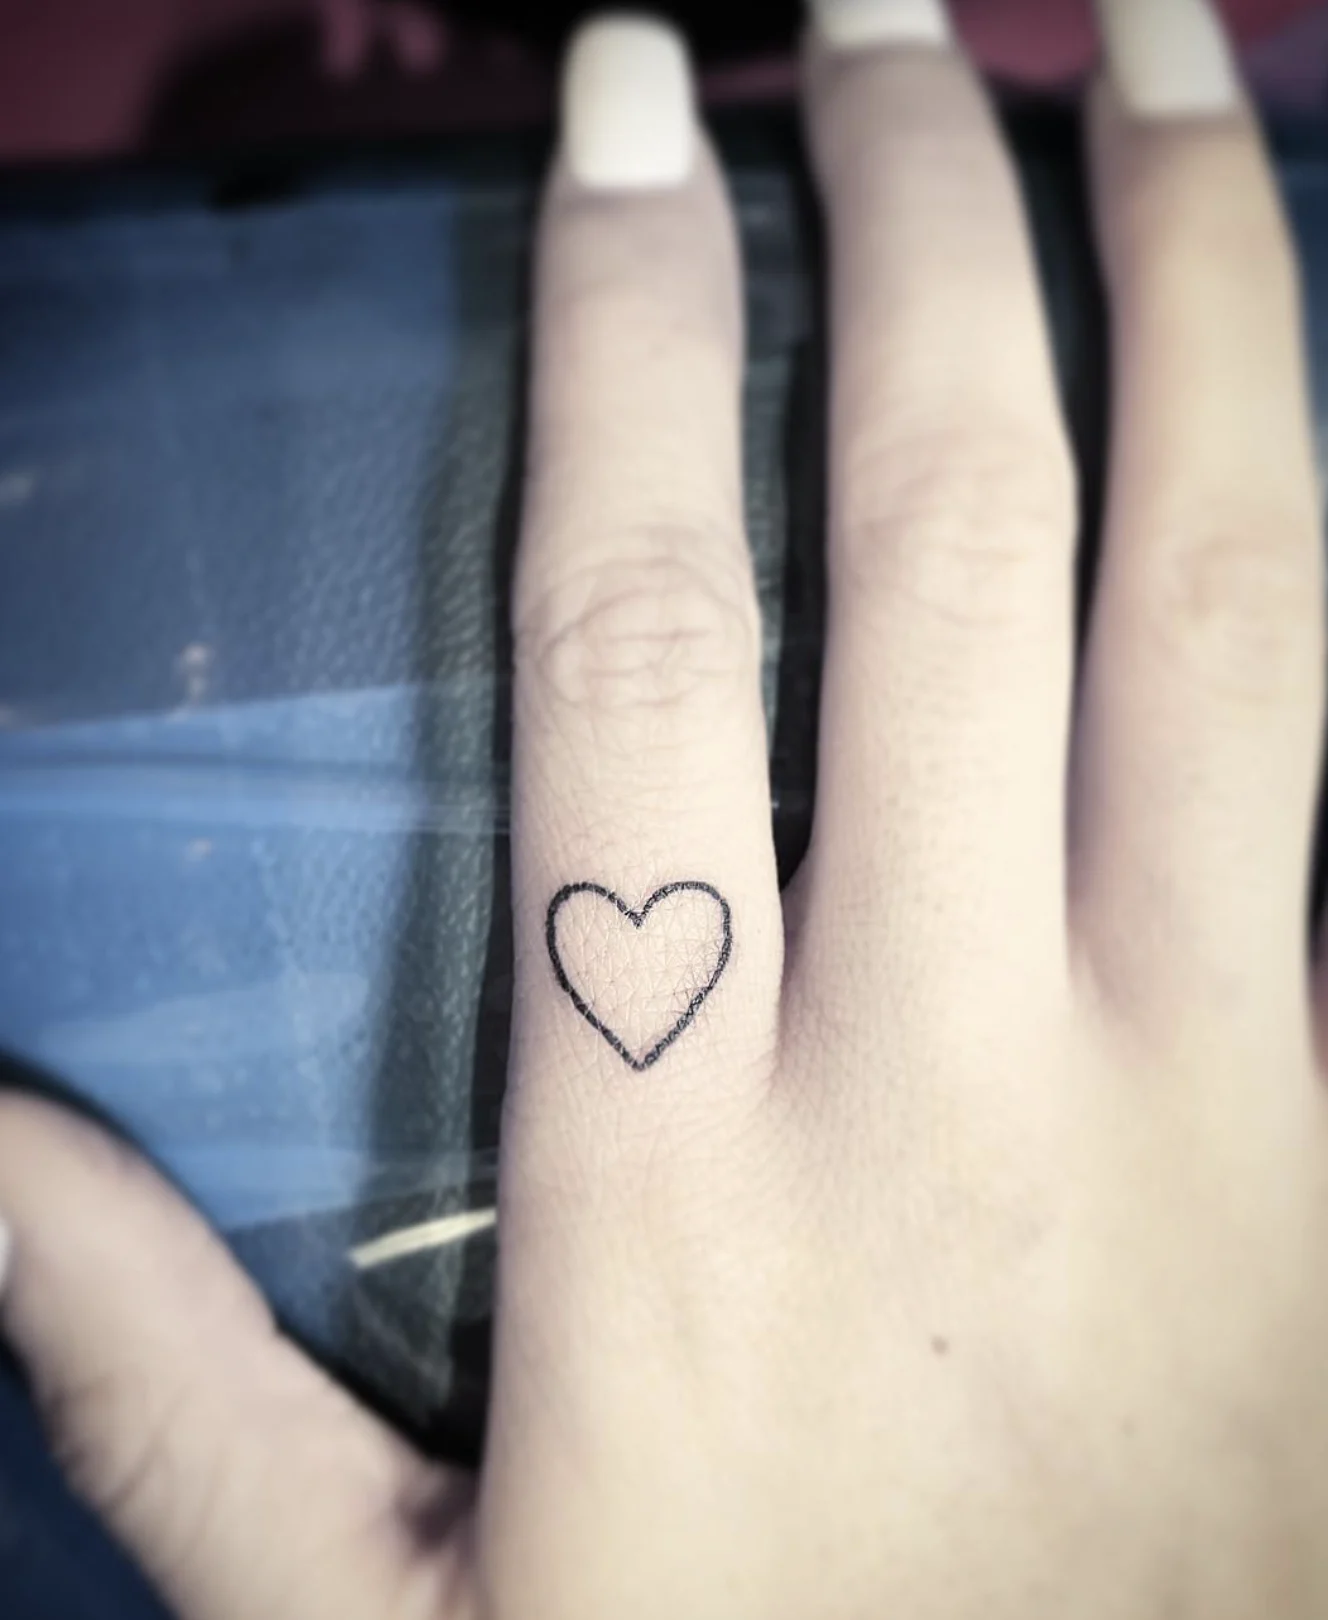 47 Amazing Love Heart Tattoos Ideas and Design for Finger